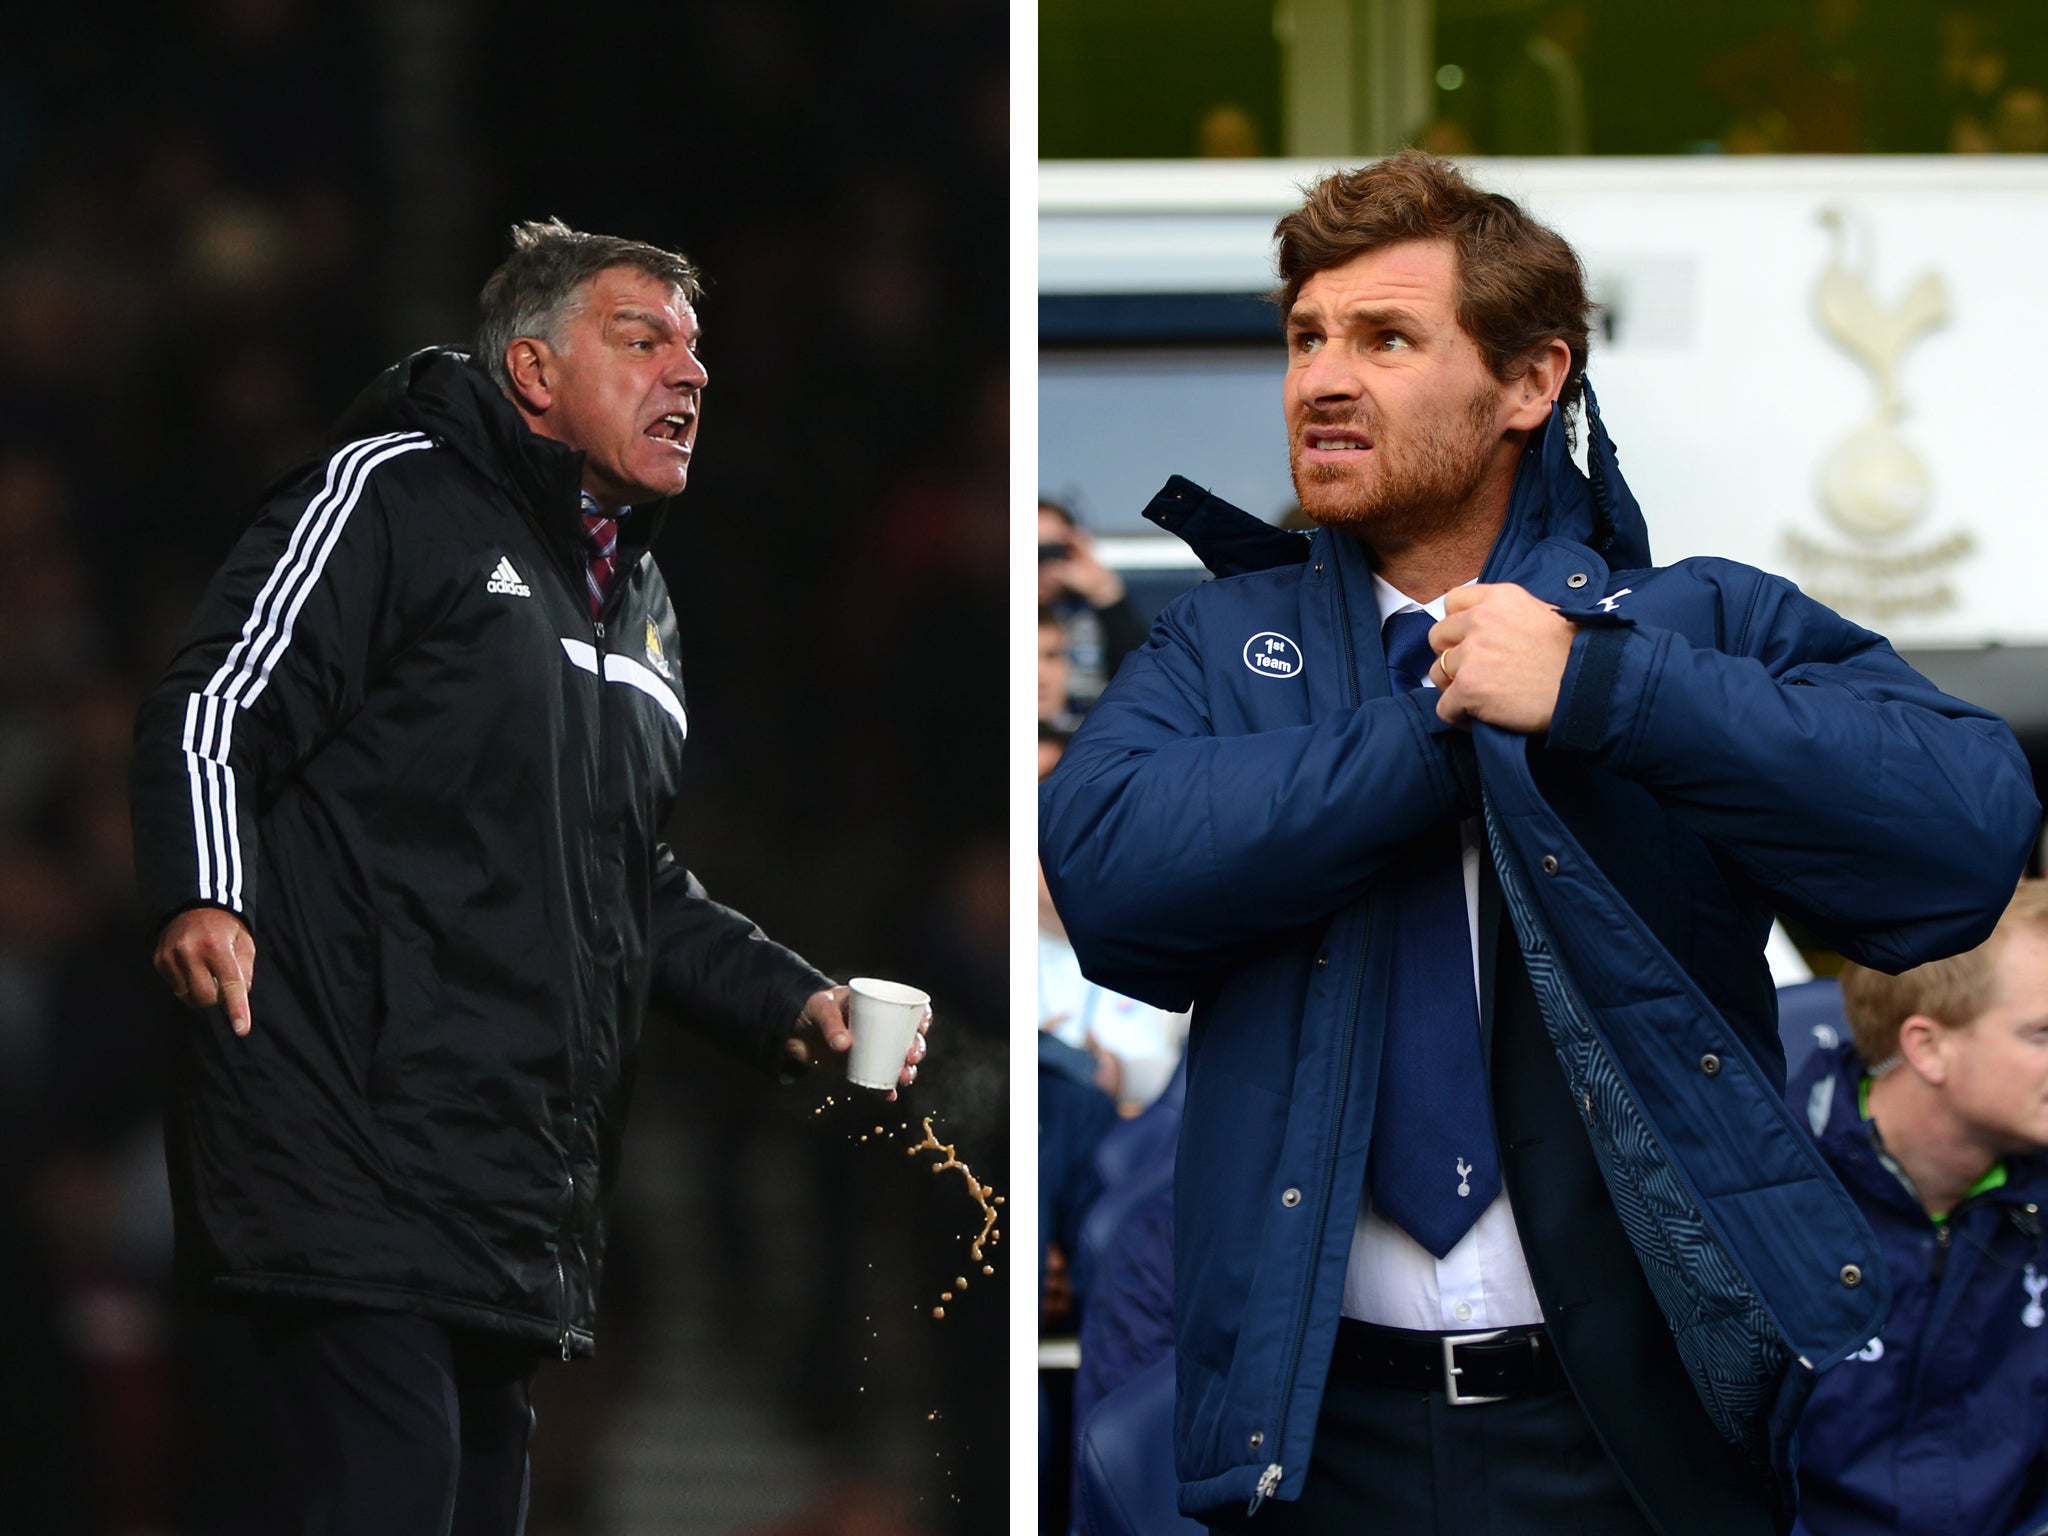 Sam Allardyce has said Tottenham manager Andre Villas-Boas has shown his 'immaturity' by responding to criticism from Alan Sugar and some journalists